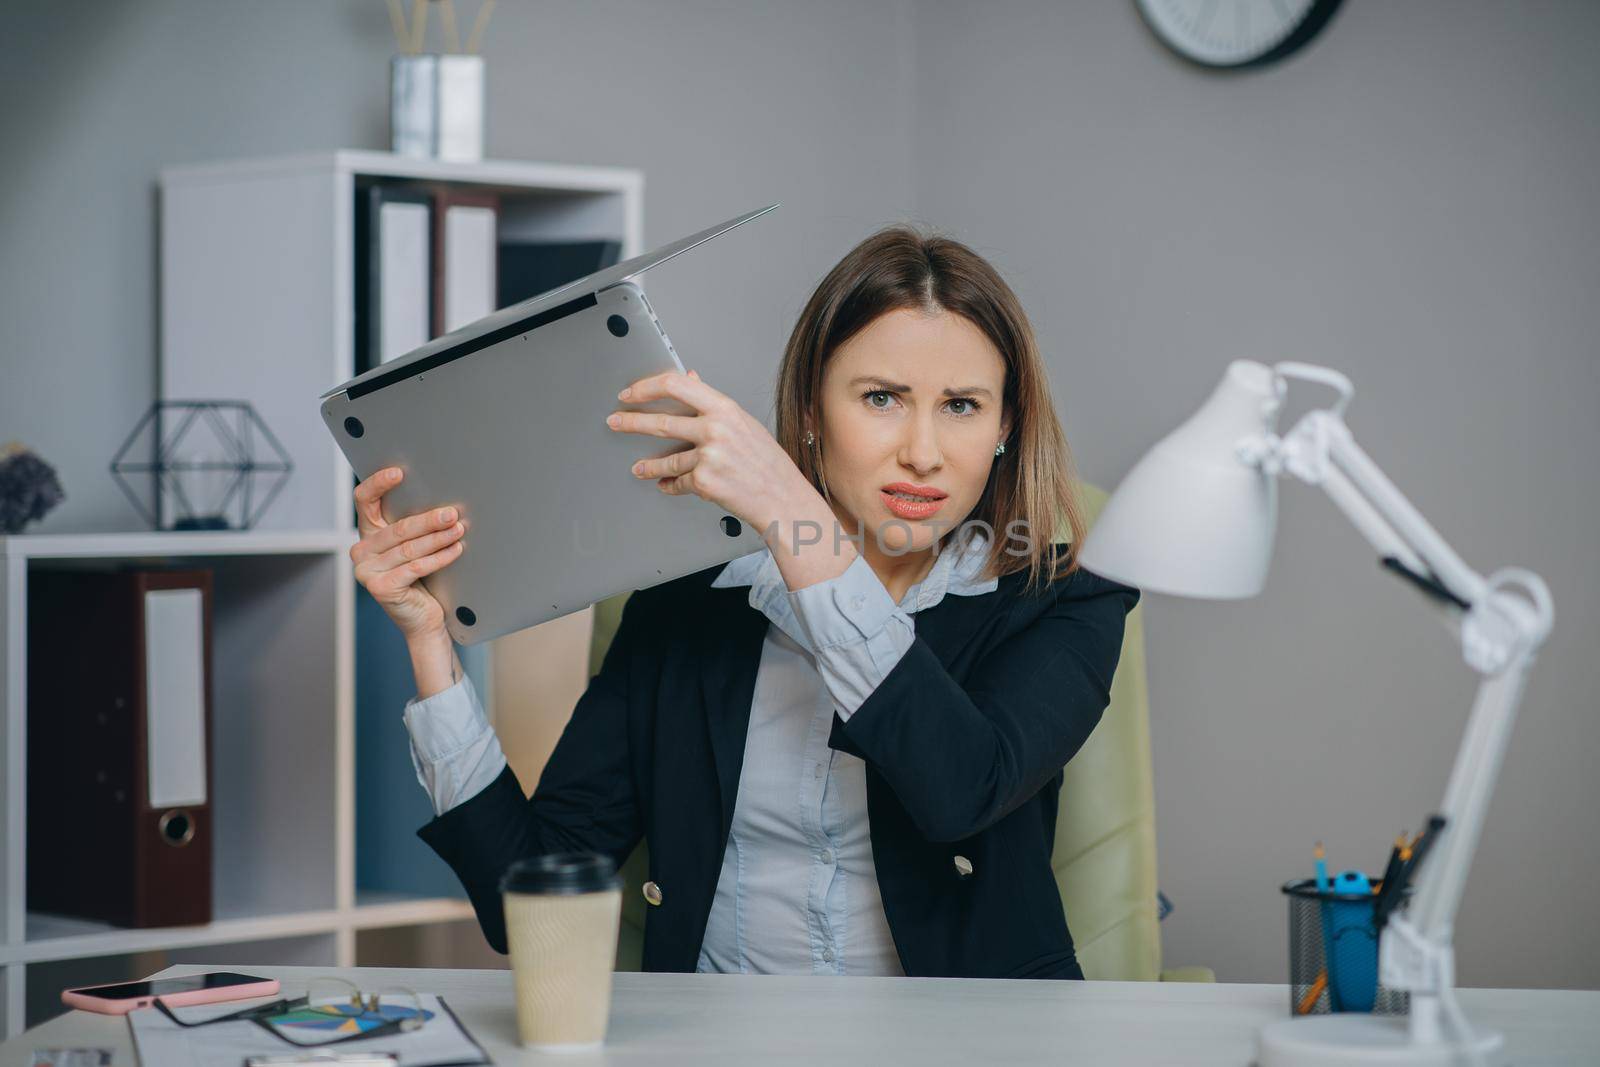 Stressed businesswoman annoyed using stuck laptop, angry woman mad about computer problem frustrated with data loss, online mistake, software error or system failure